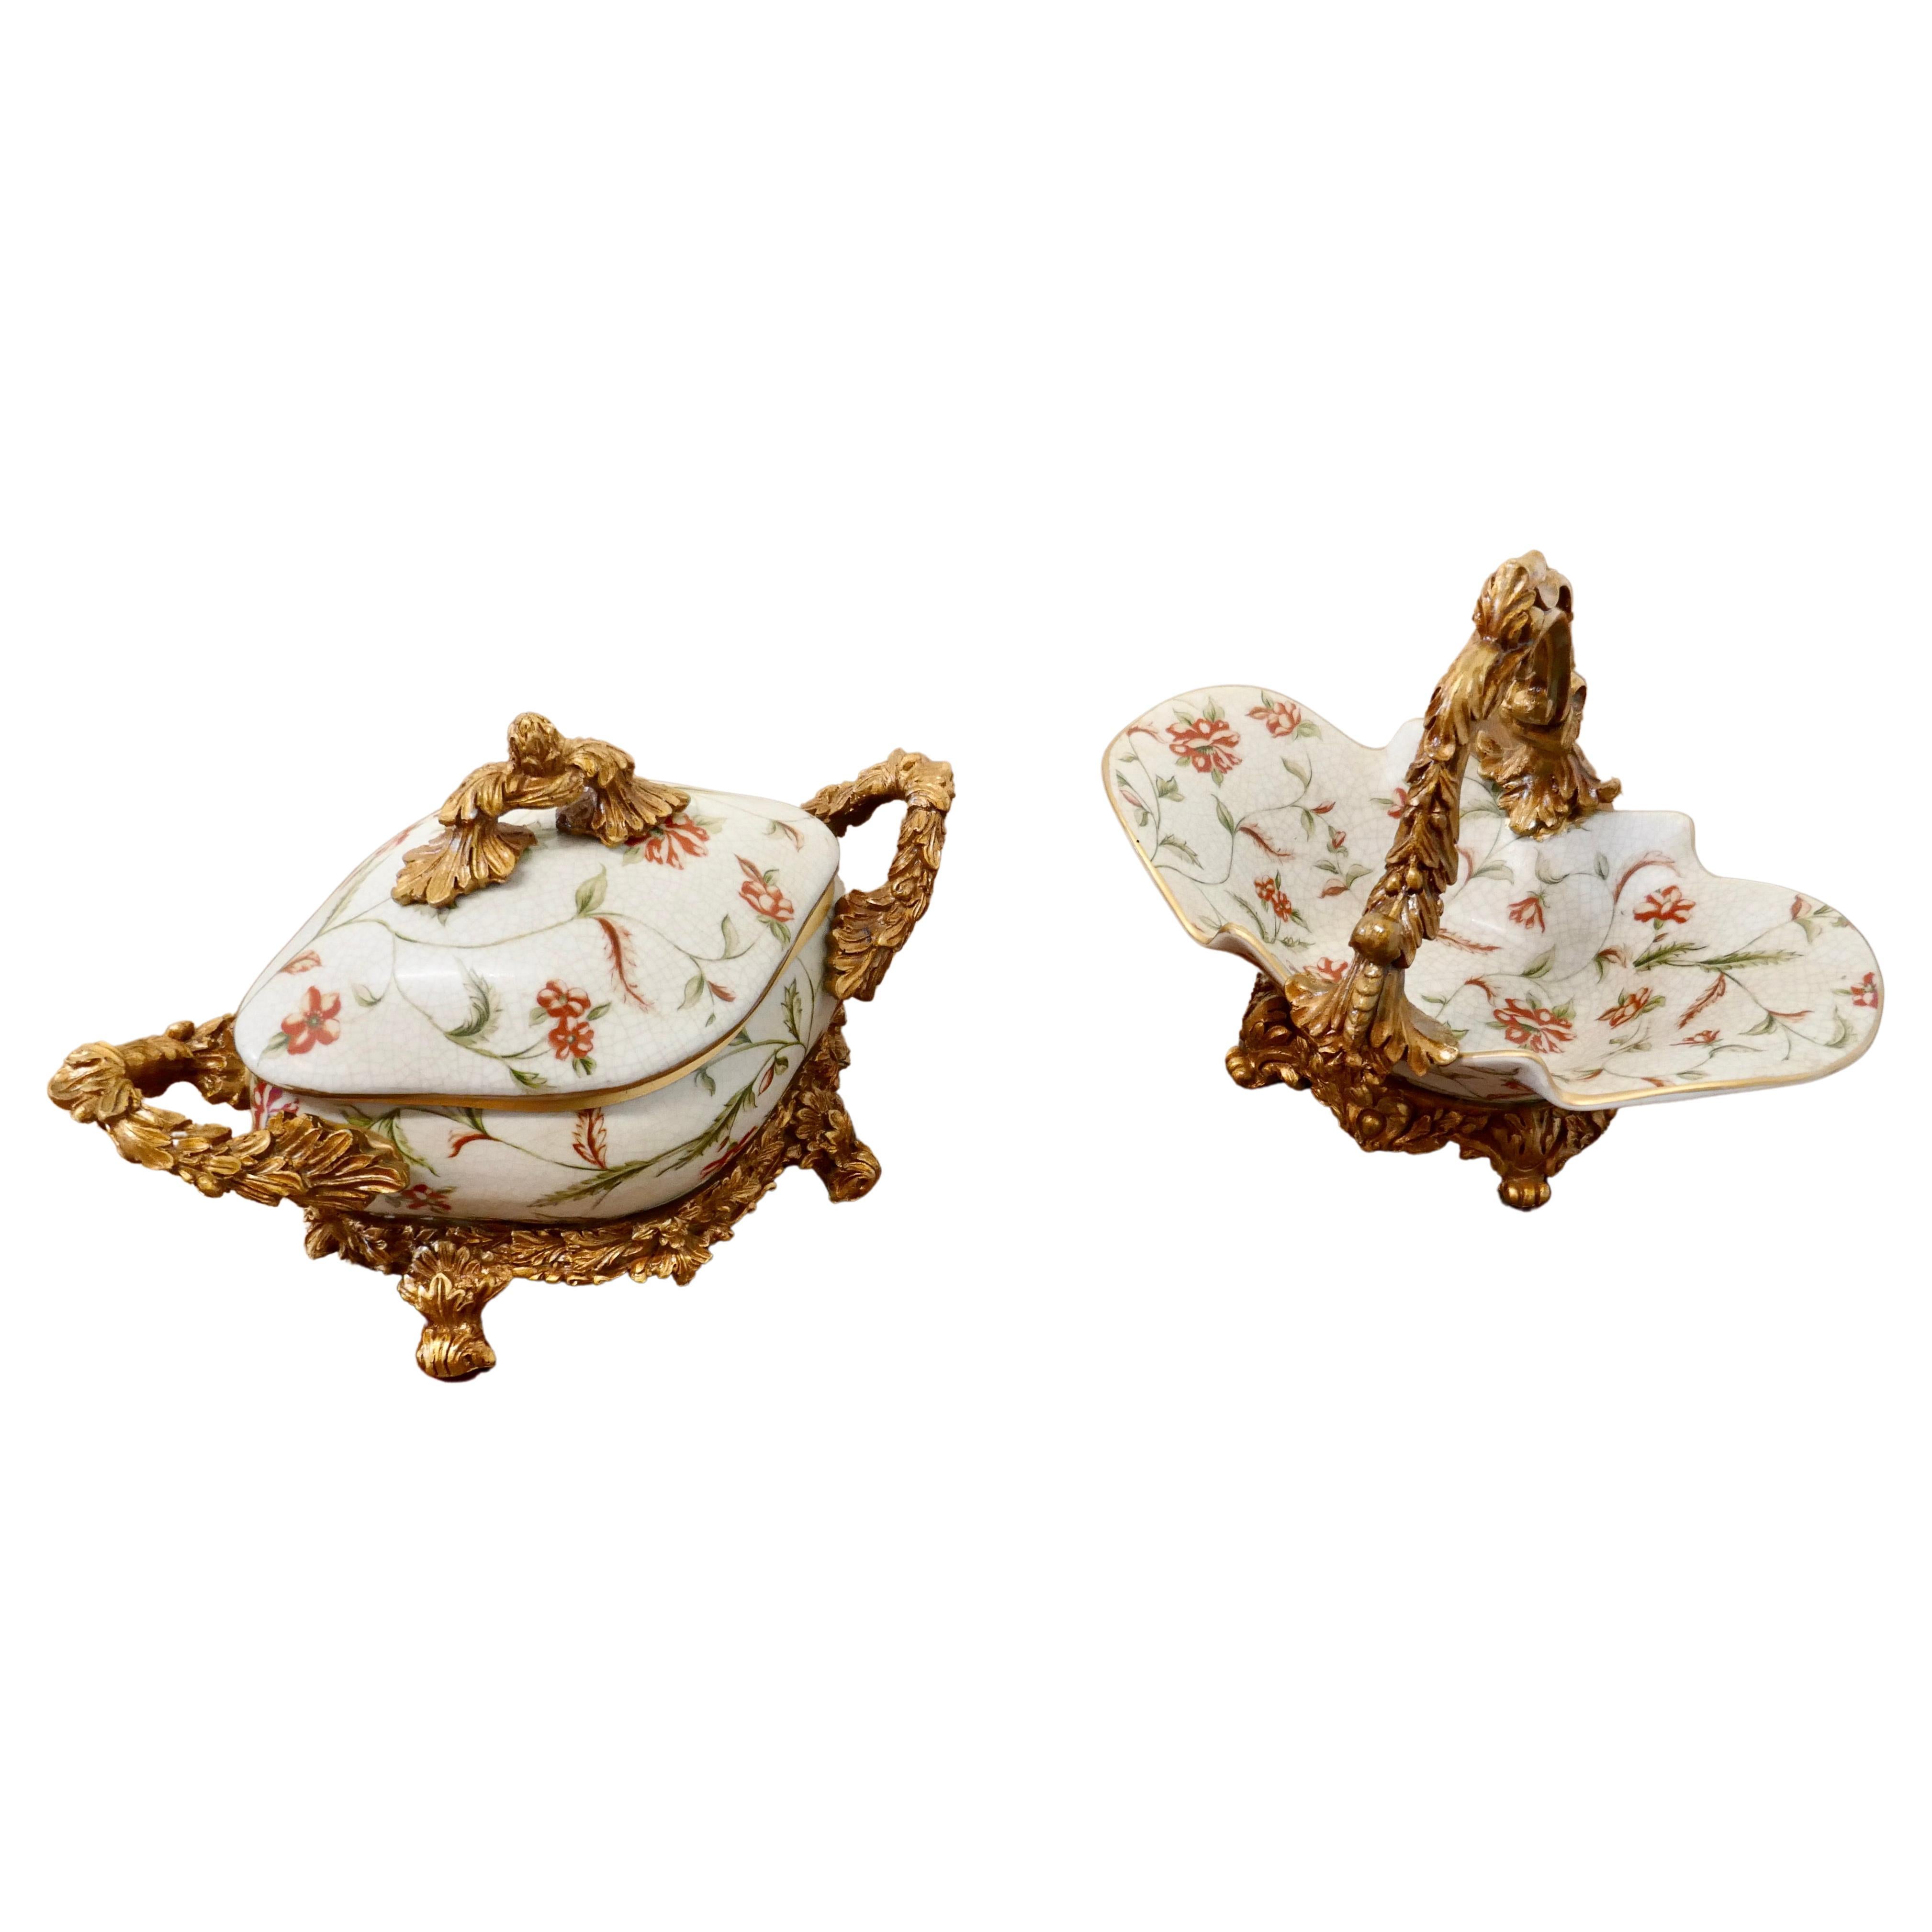 Pair of French Rococo Style Sweet Dishes For Sale